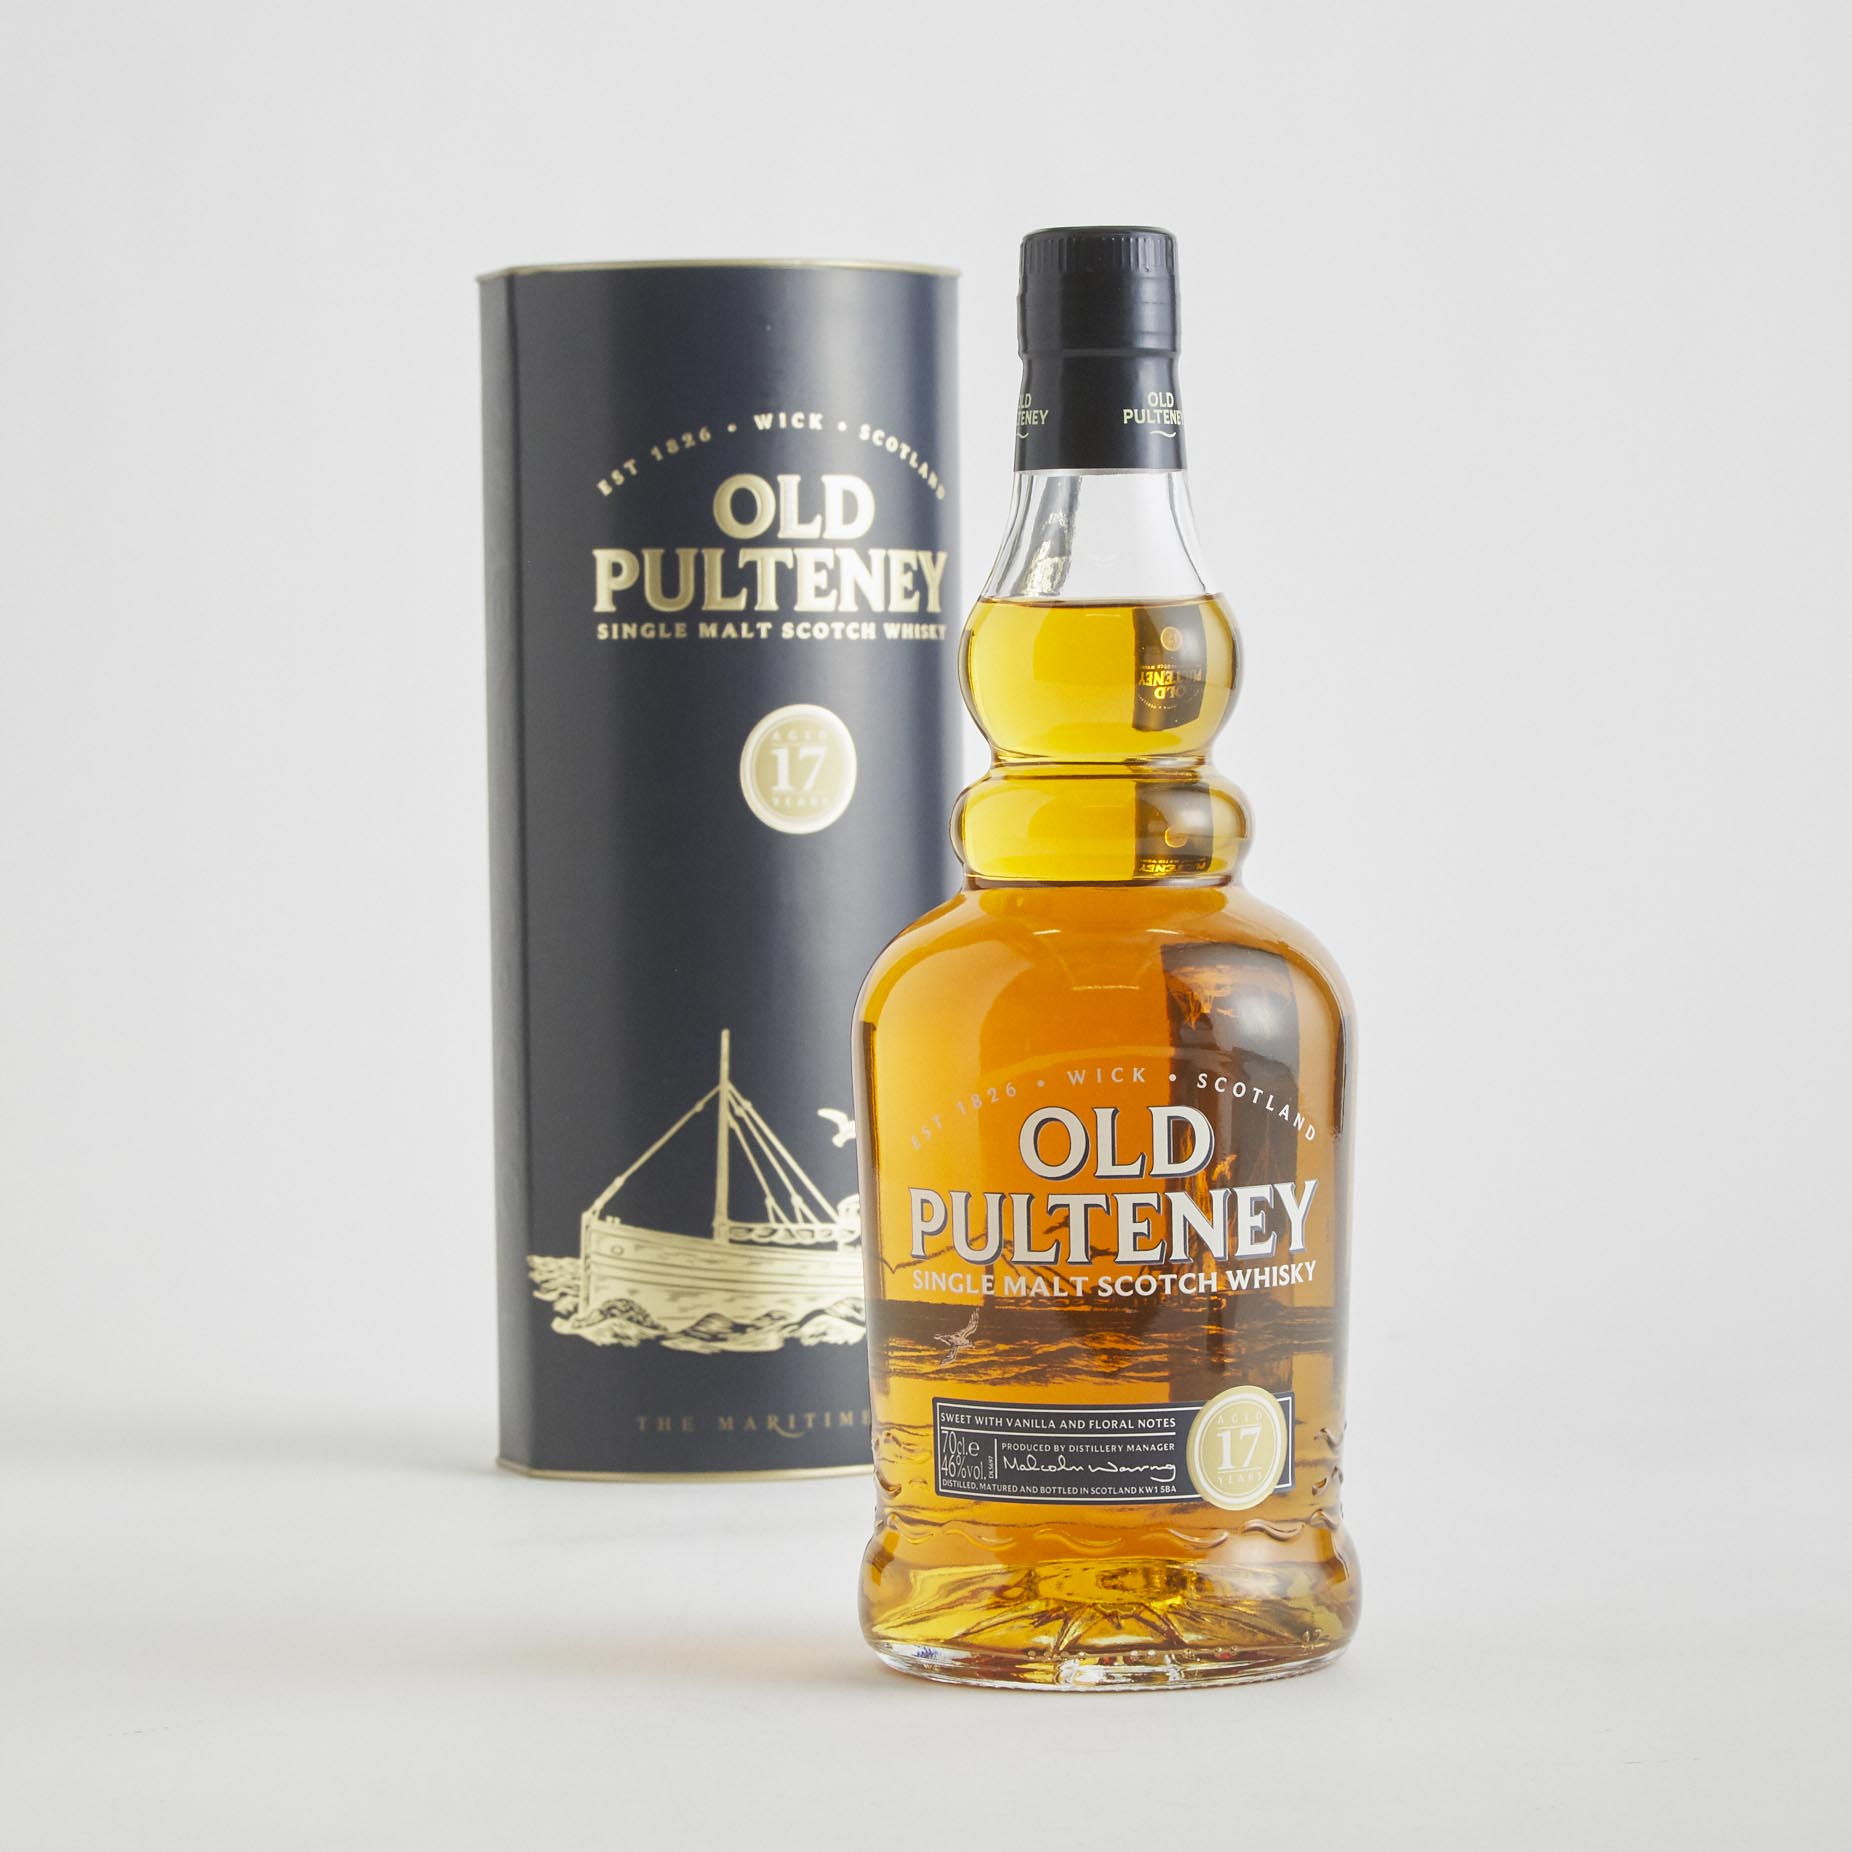 OLD PULTENEY SINGLE MALT SCOTCH WHISKY 17 YEARS (ONE 70 CL)